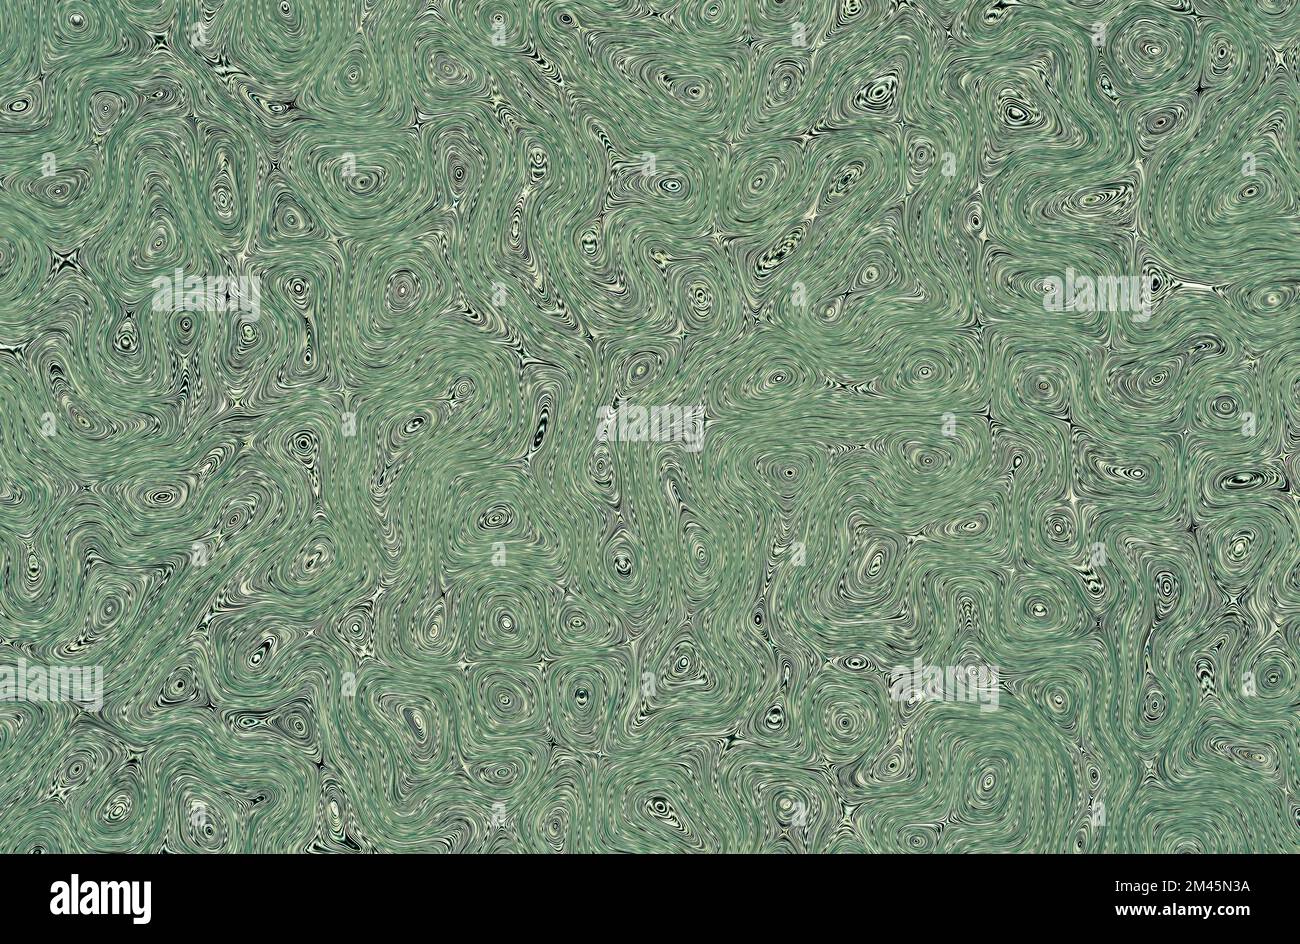 Modern surrealism faded pistachio green abstract smooth pattern background. Surface swirls illustration with liquid appearance. Stock Photo